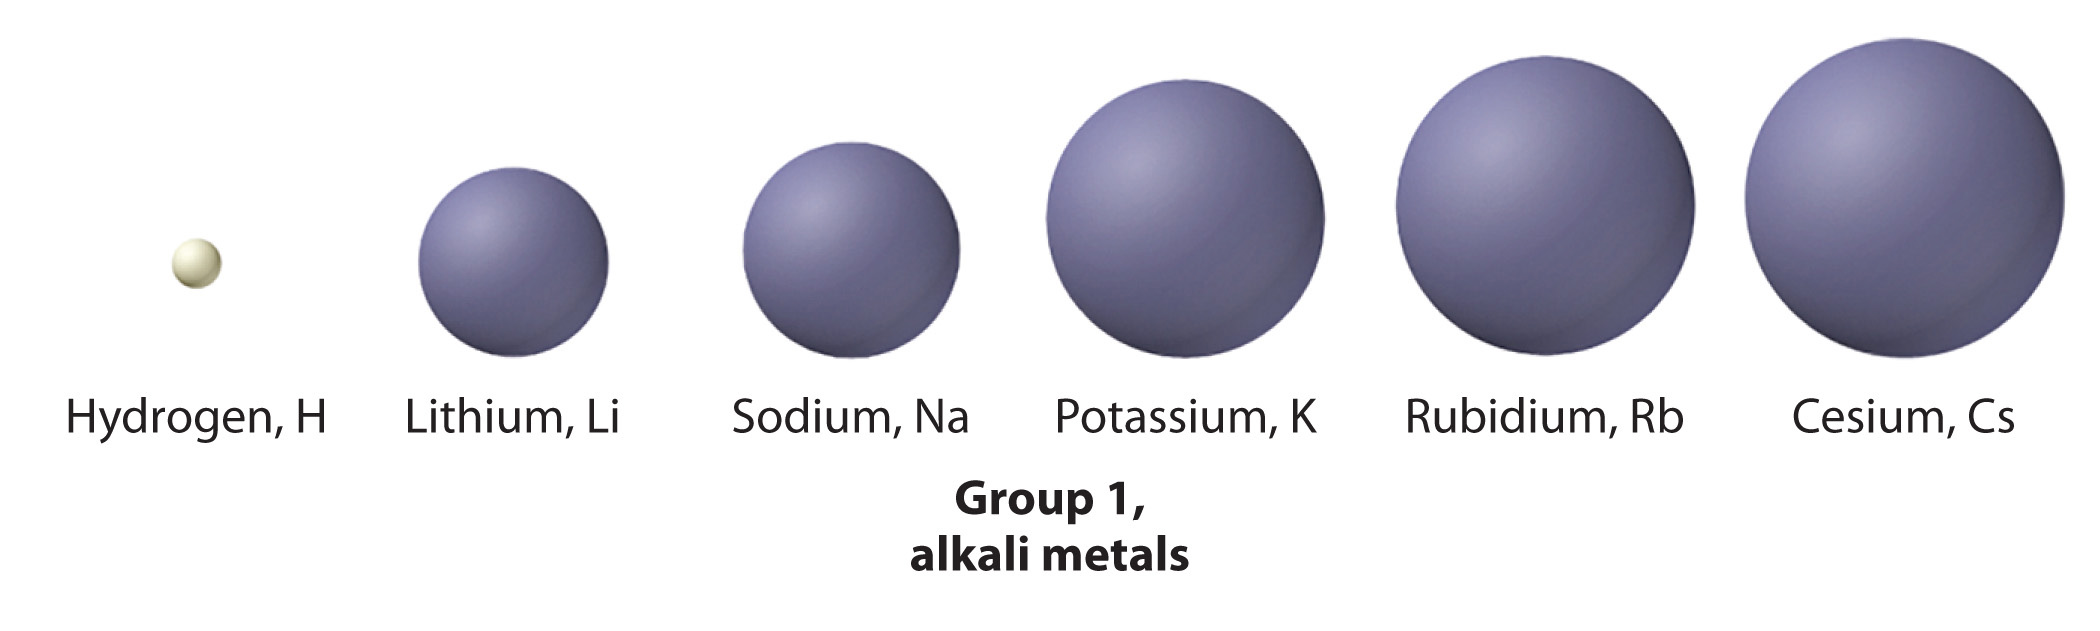 The group 1, alkali metals, are shown in order of increasing size.